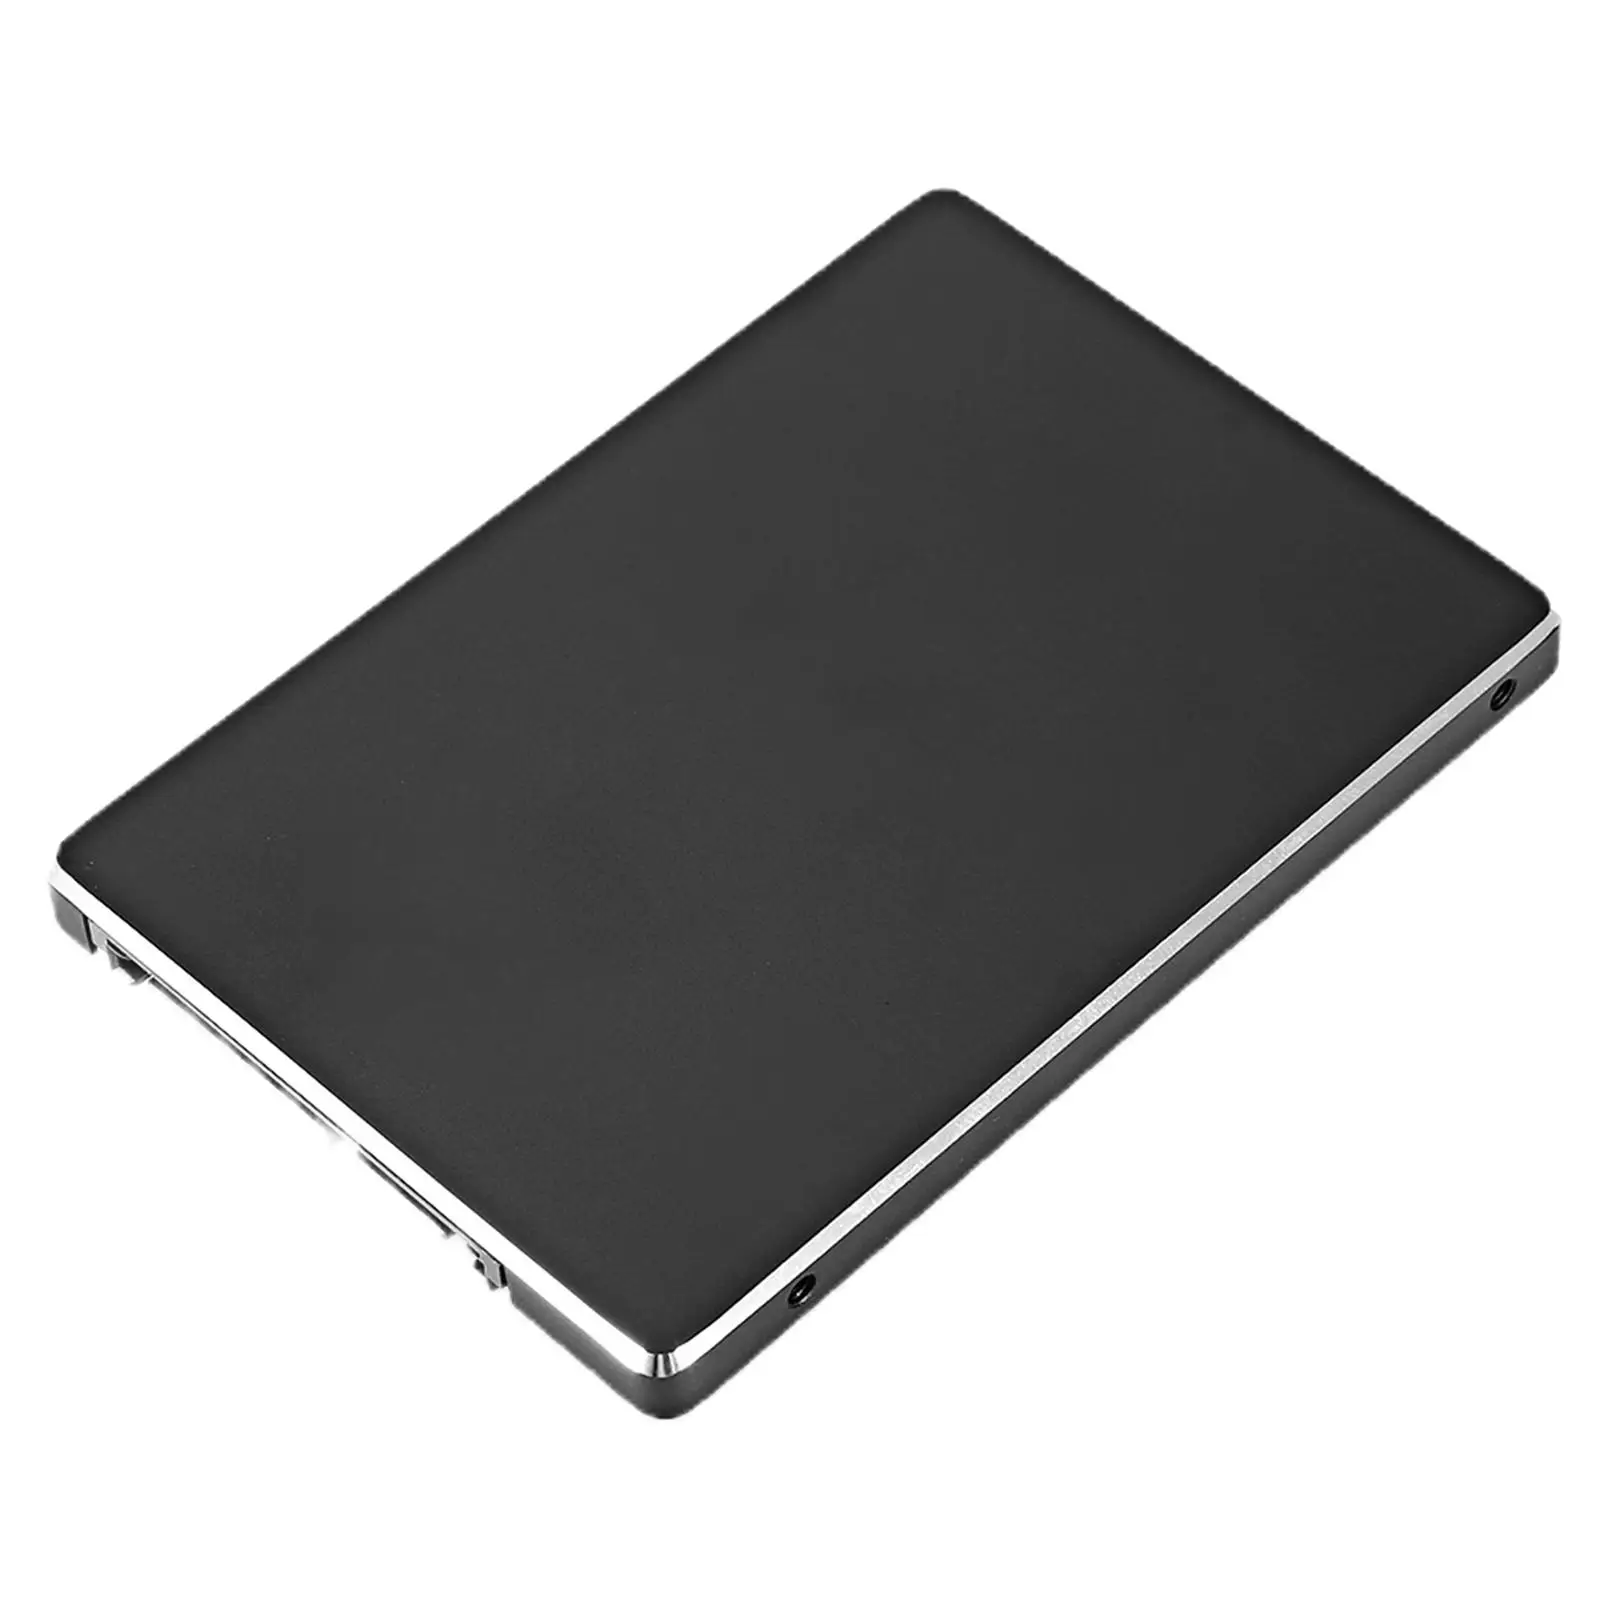 M.2 NGFF to SATA III SSD Enclosure Aluminum Alloy 2 in 1 Adapter M.2 NGFF to SATA SSD S103-Rtk for 2242 2260 2280mm Hard Drive